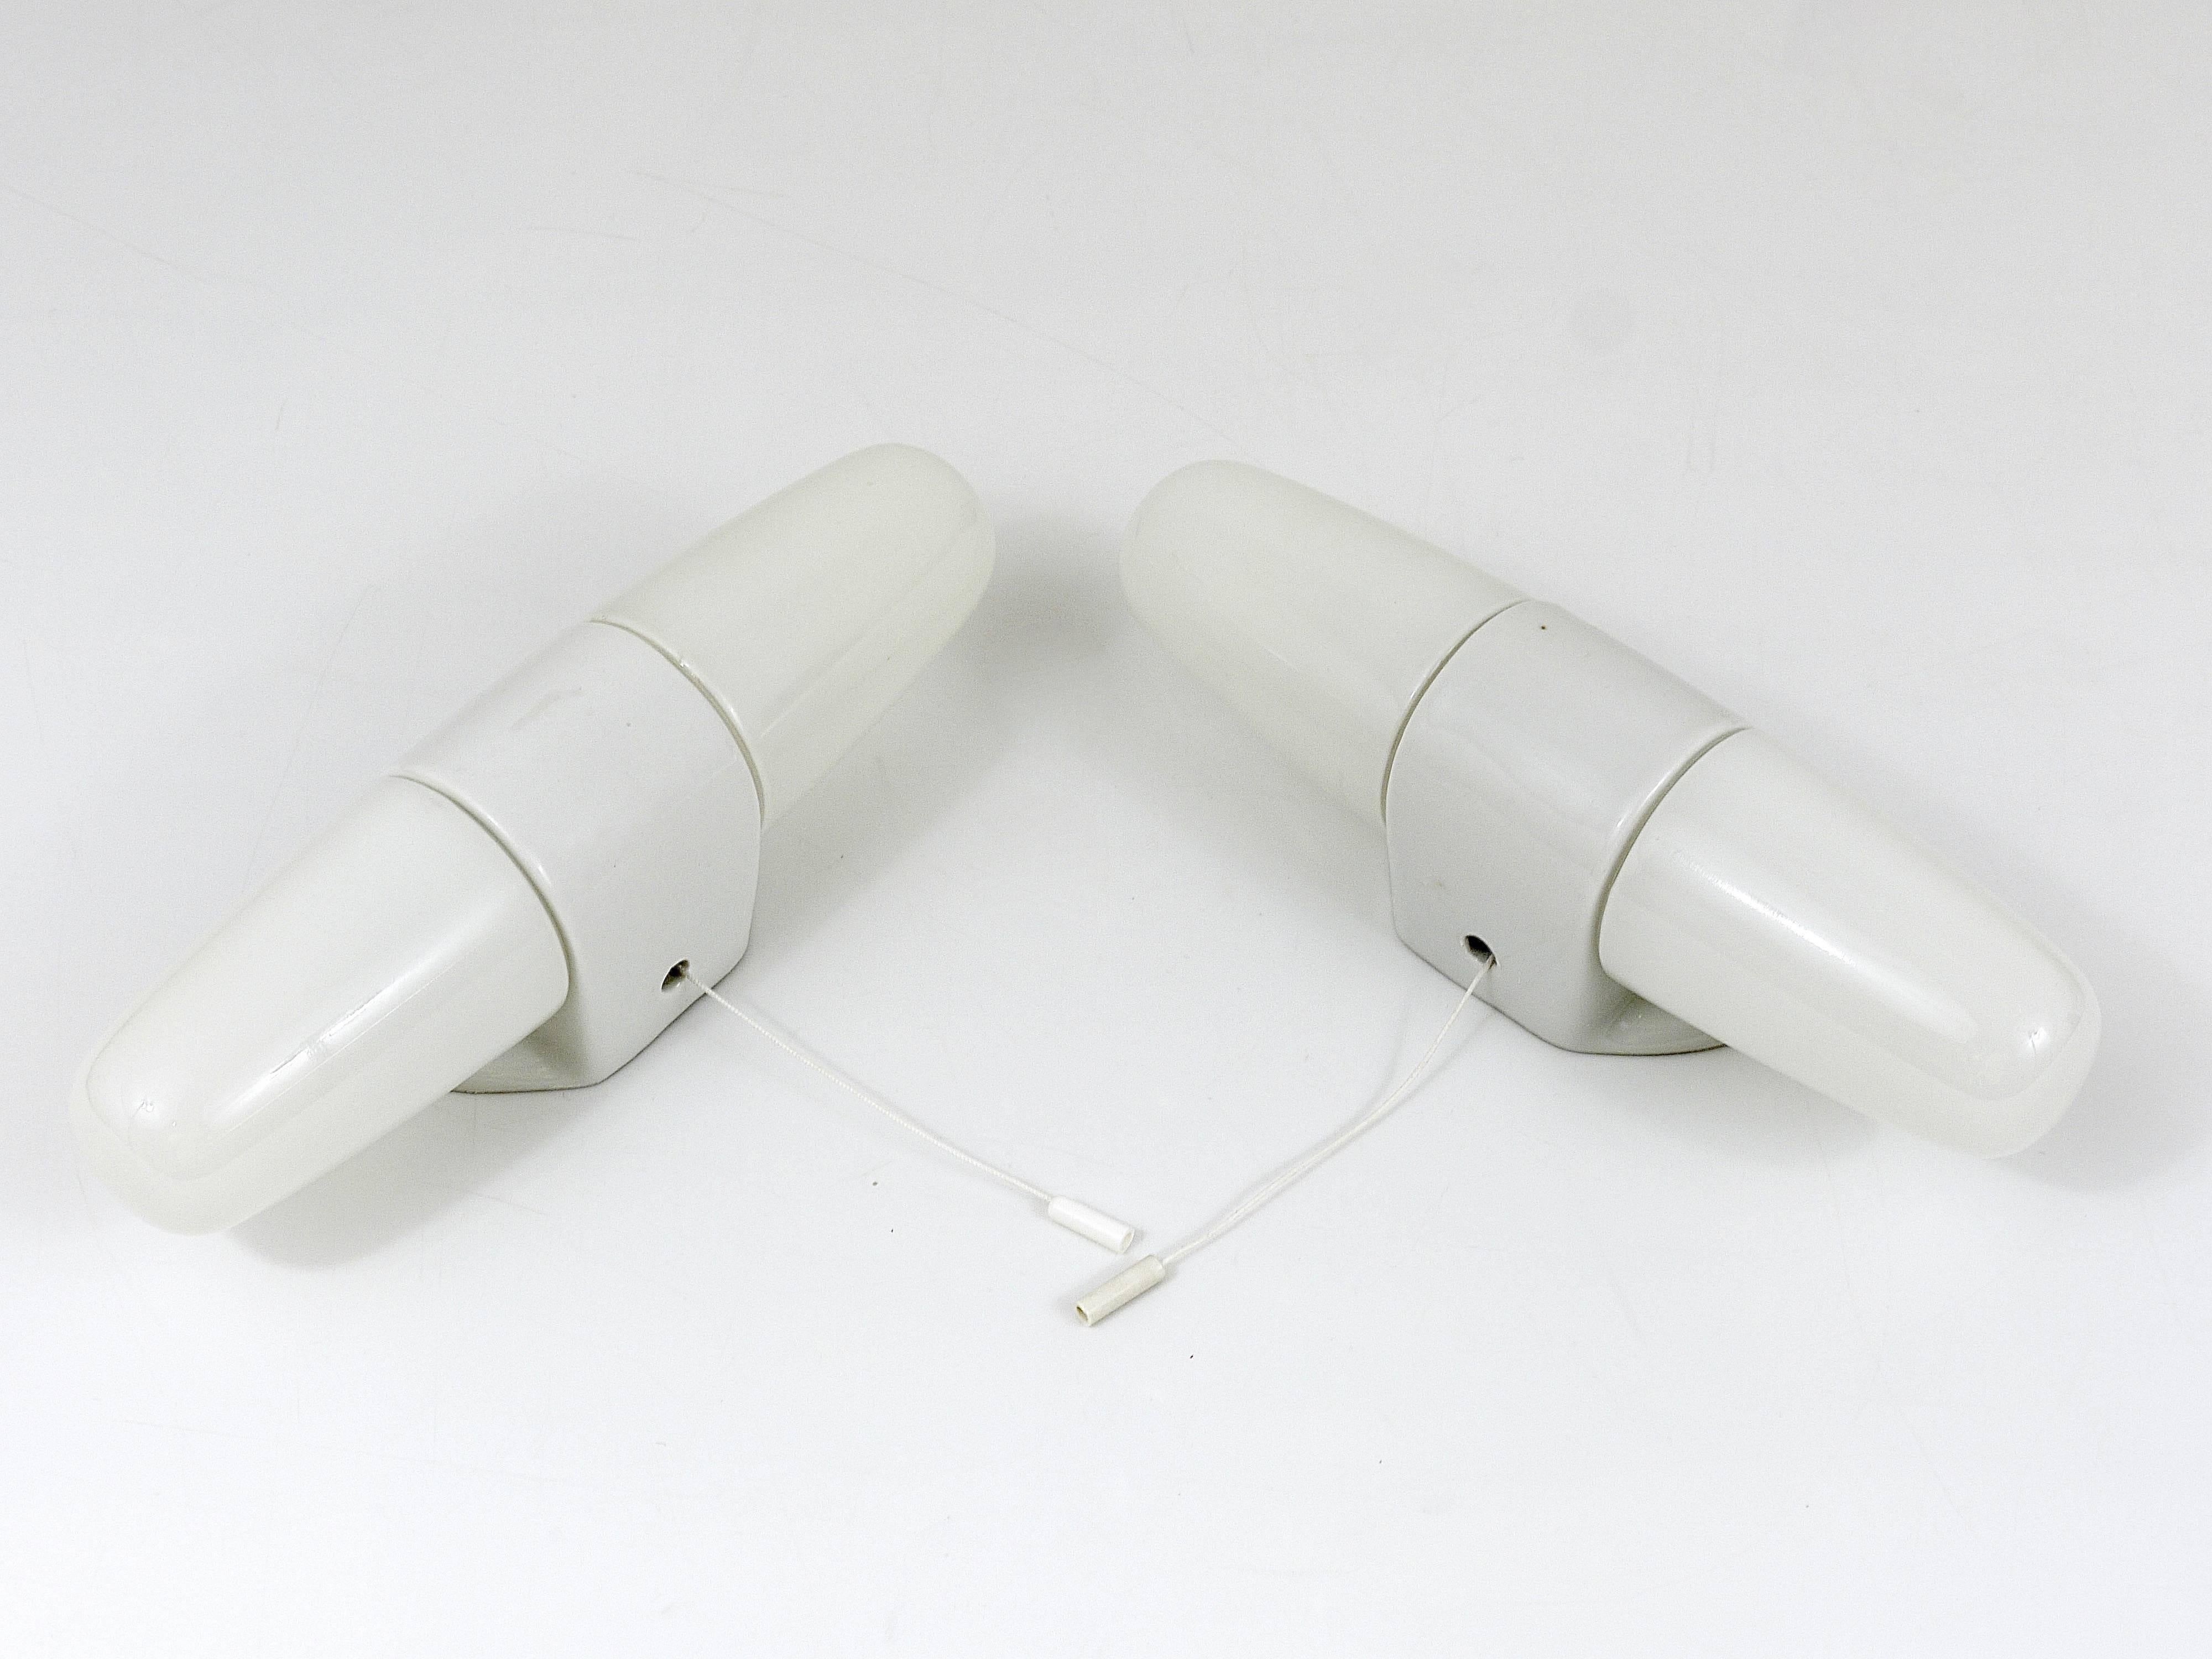 Two beautiful wall lights with two sockets each, made of porcelain with white glace and opal glass bulb covers, designed by Wilhelm Wagenfeld. Executed in the 1950s by Linder Wandleuchten, Germany. Has integrated switches, which can be removed